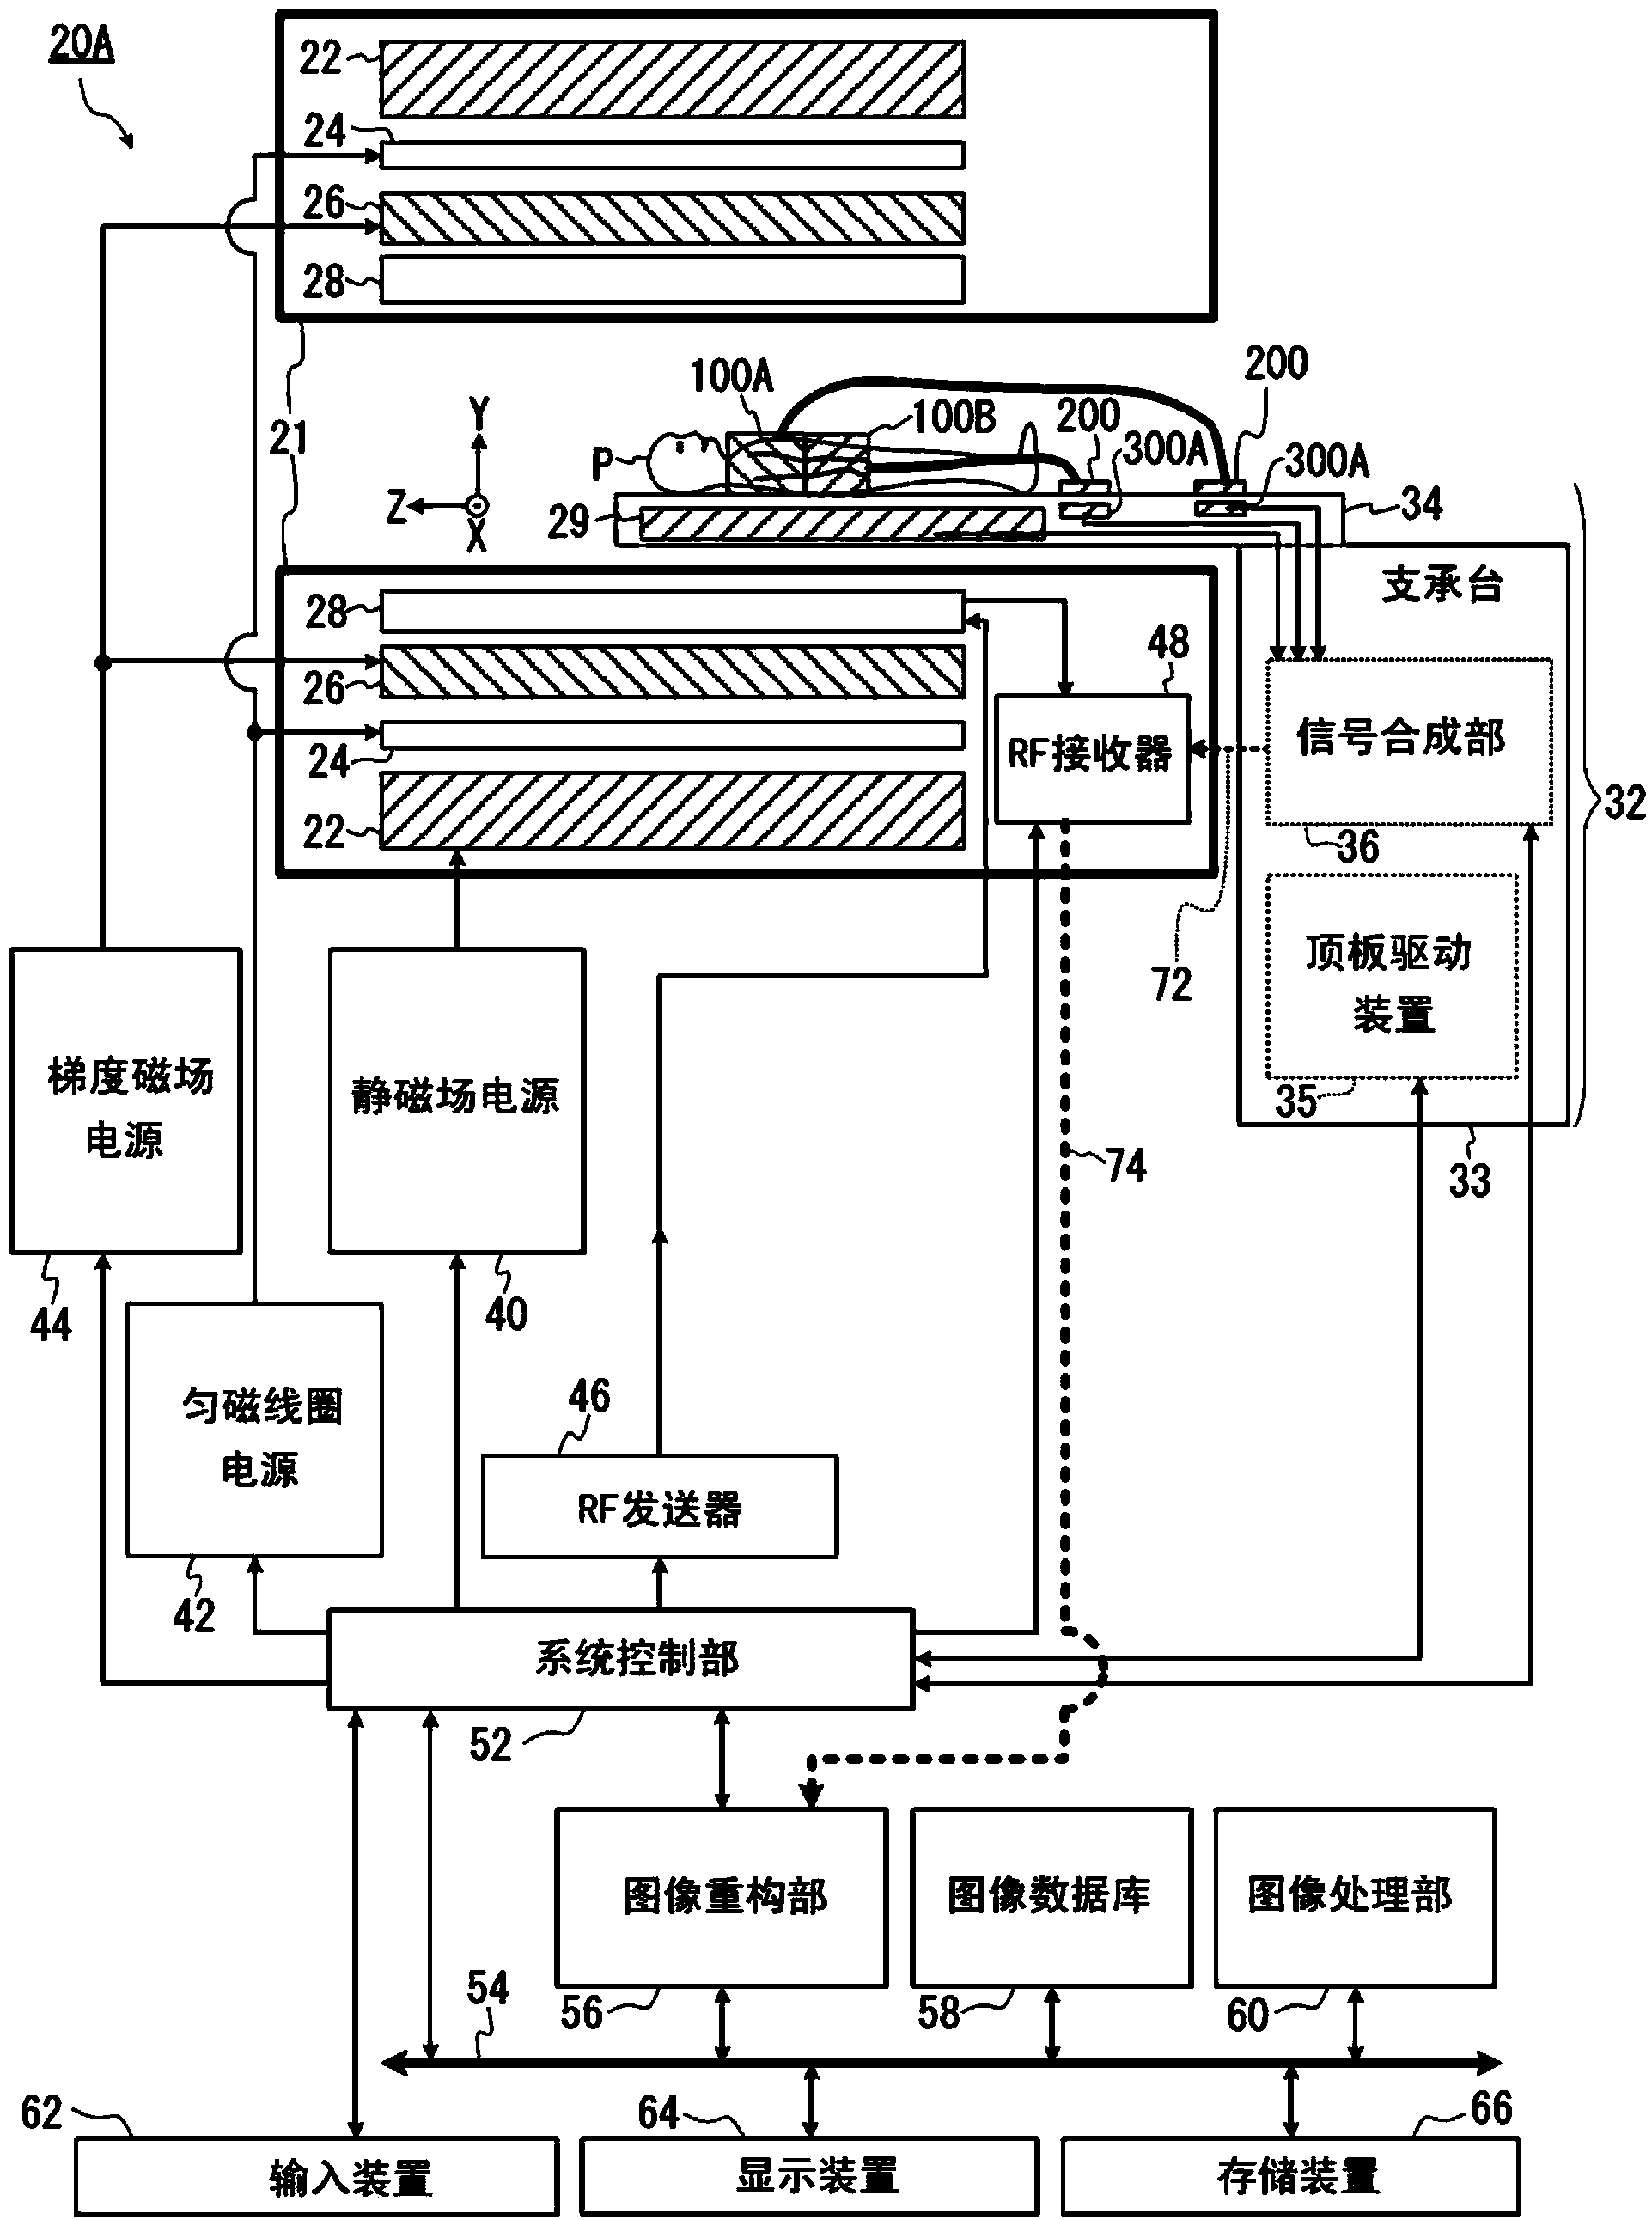 Magnetic resonance imaging apparatus and bed device